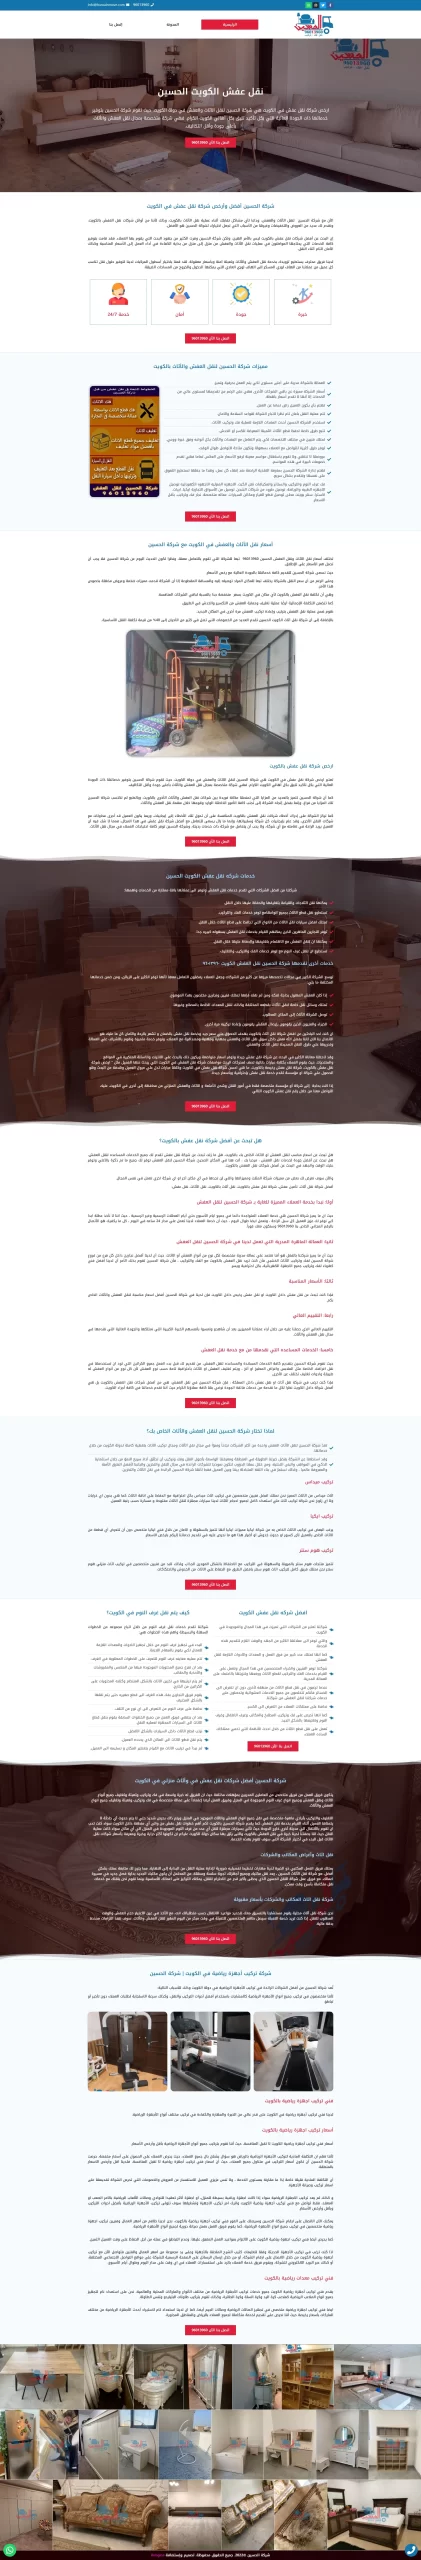 Al-Hussein Company Website for Moving Furniture in Kuwait